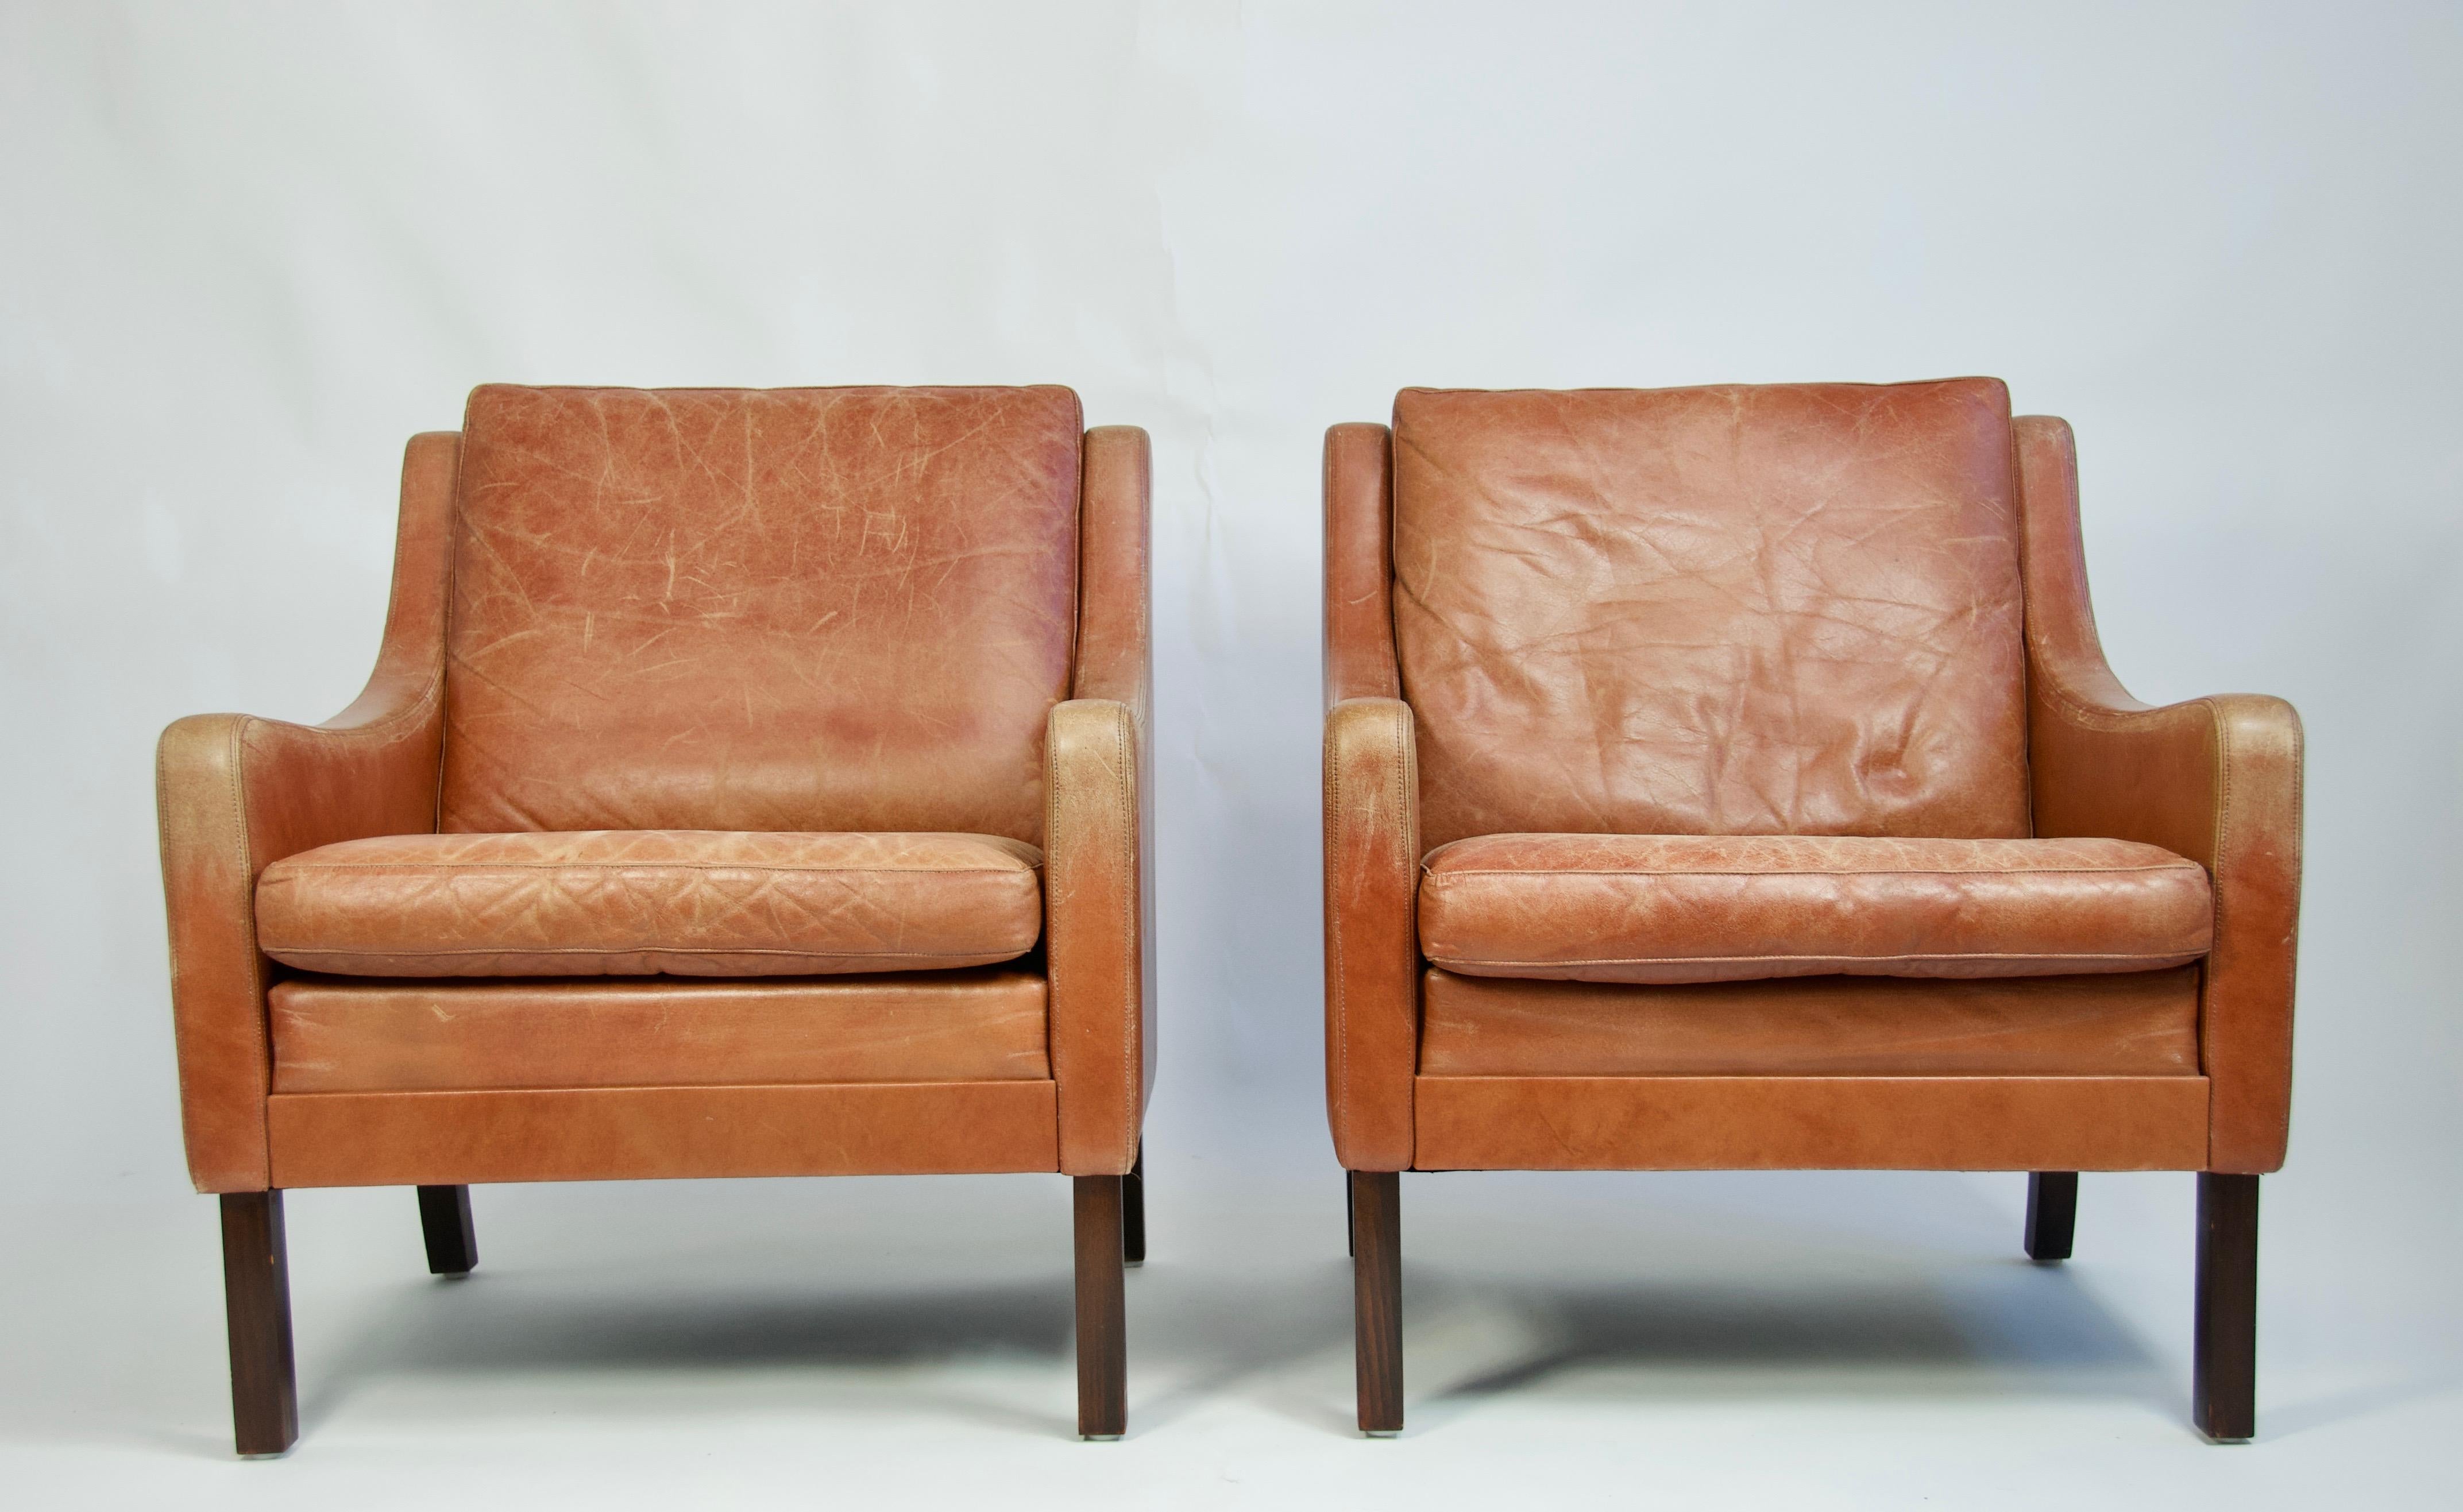 Pair of Danish lounge chairs with nicely worn original leather.